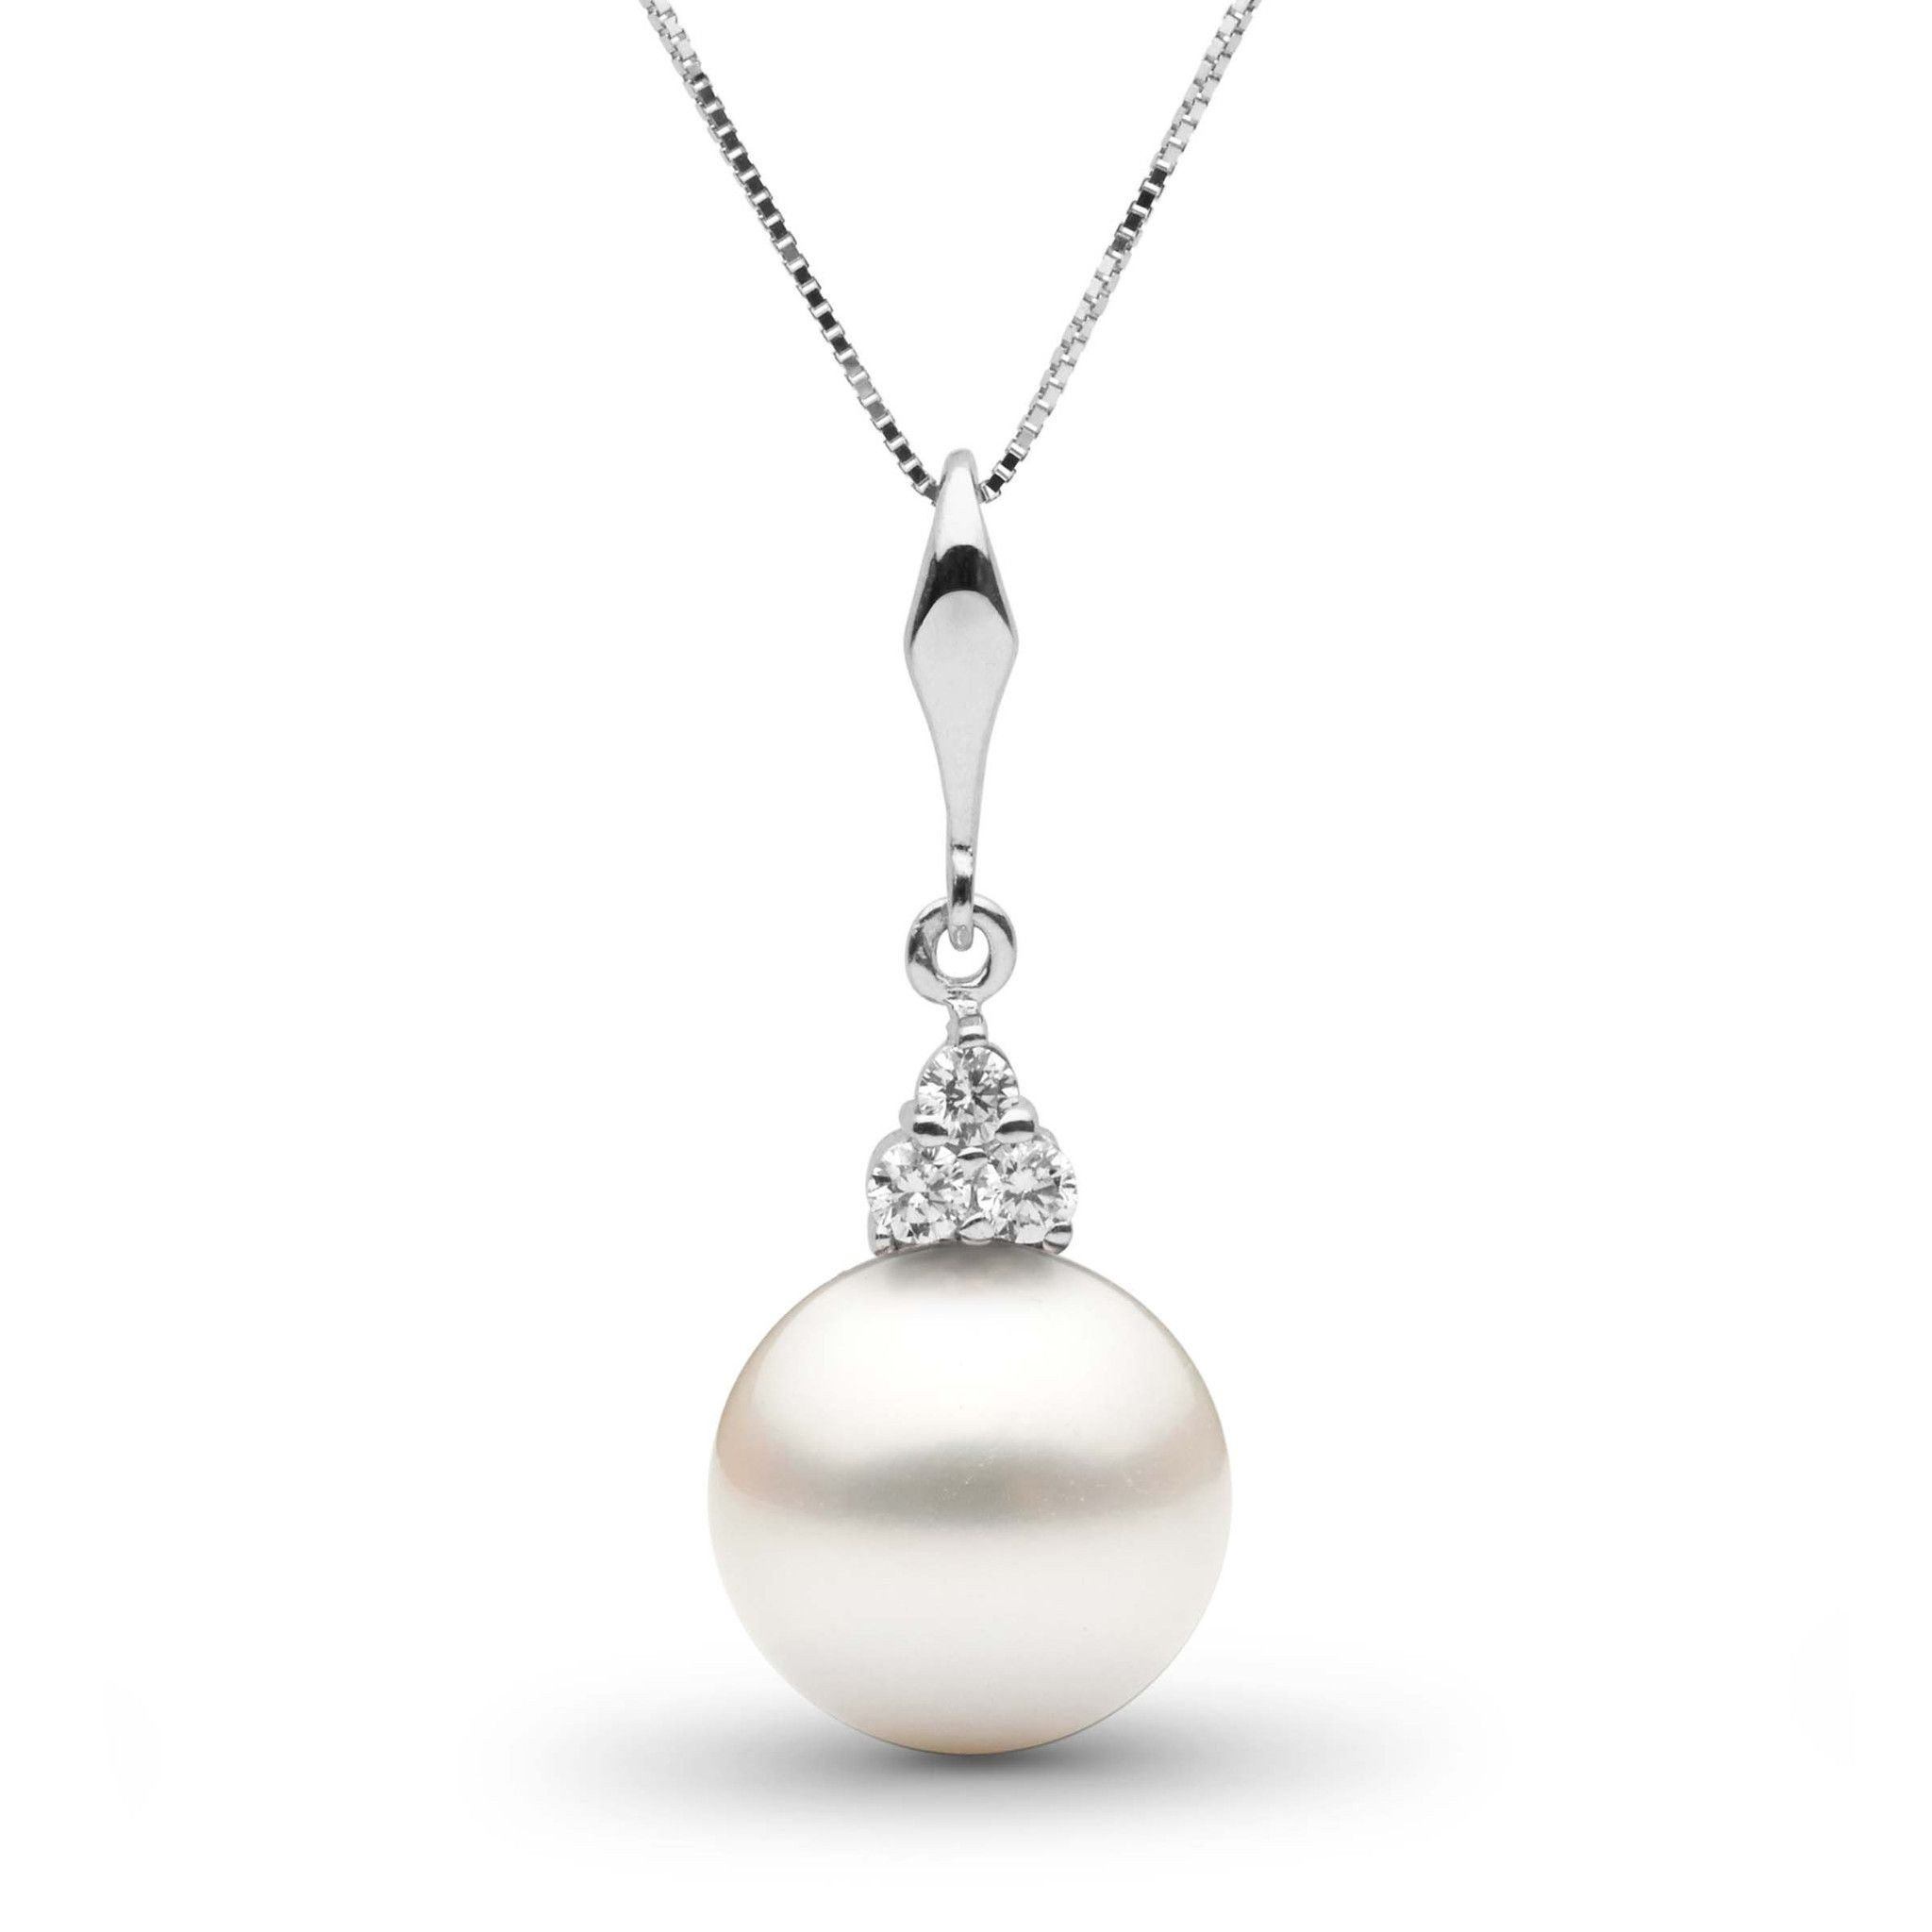 Always Collection White 10.0-11.0 mm South Sea Pearl and Diamond Pendant